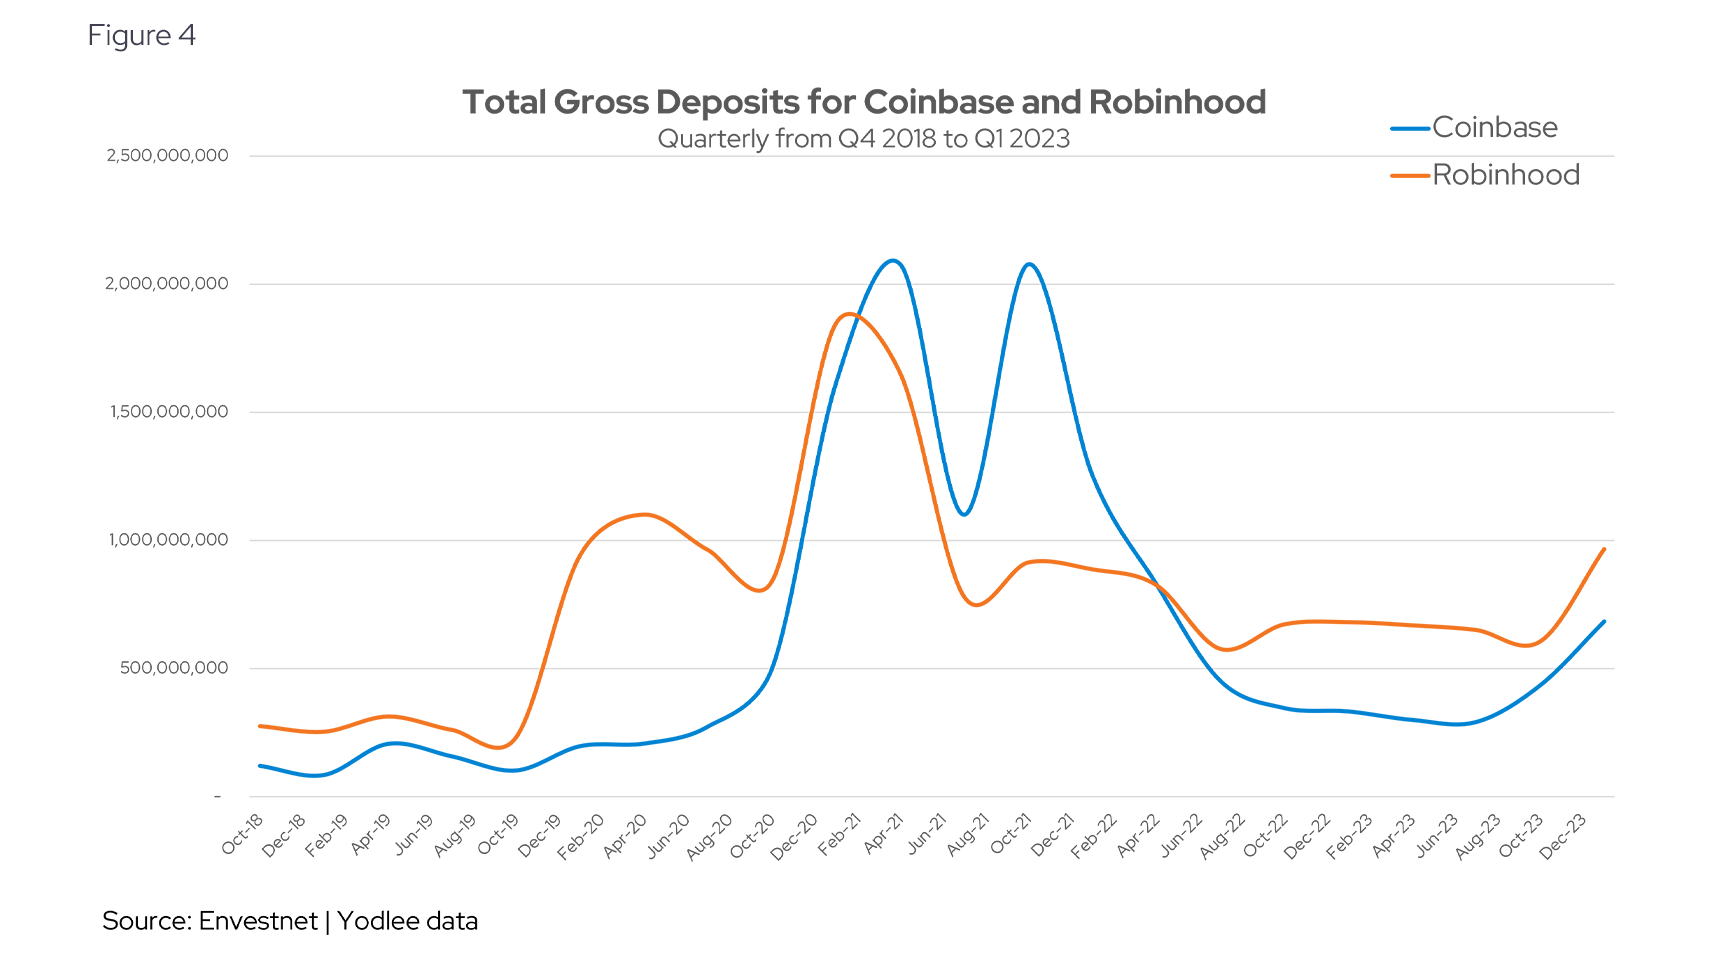 Total Gross Deposits for Coinbase and Robinhood